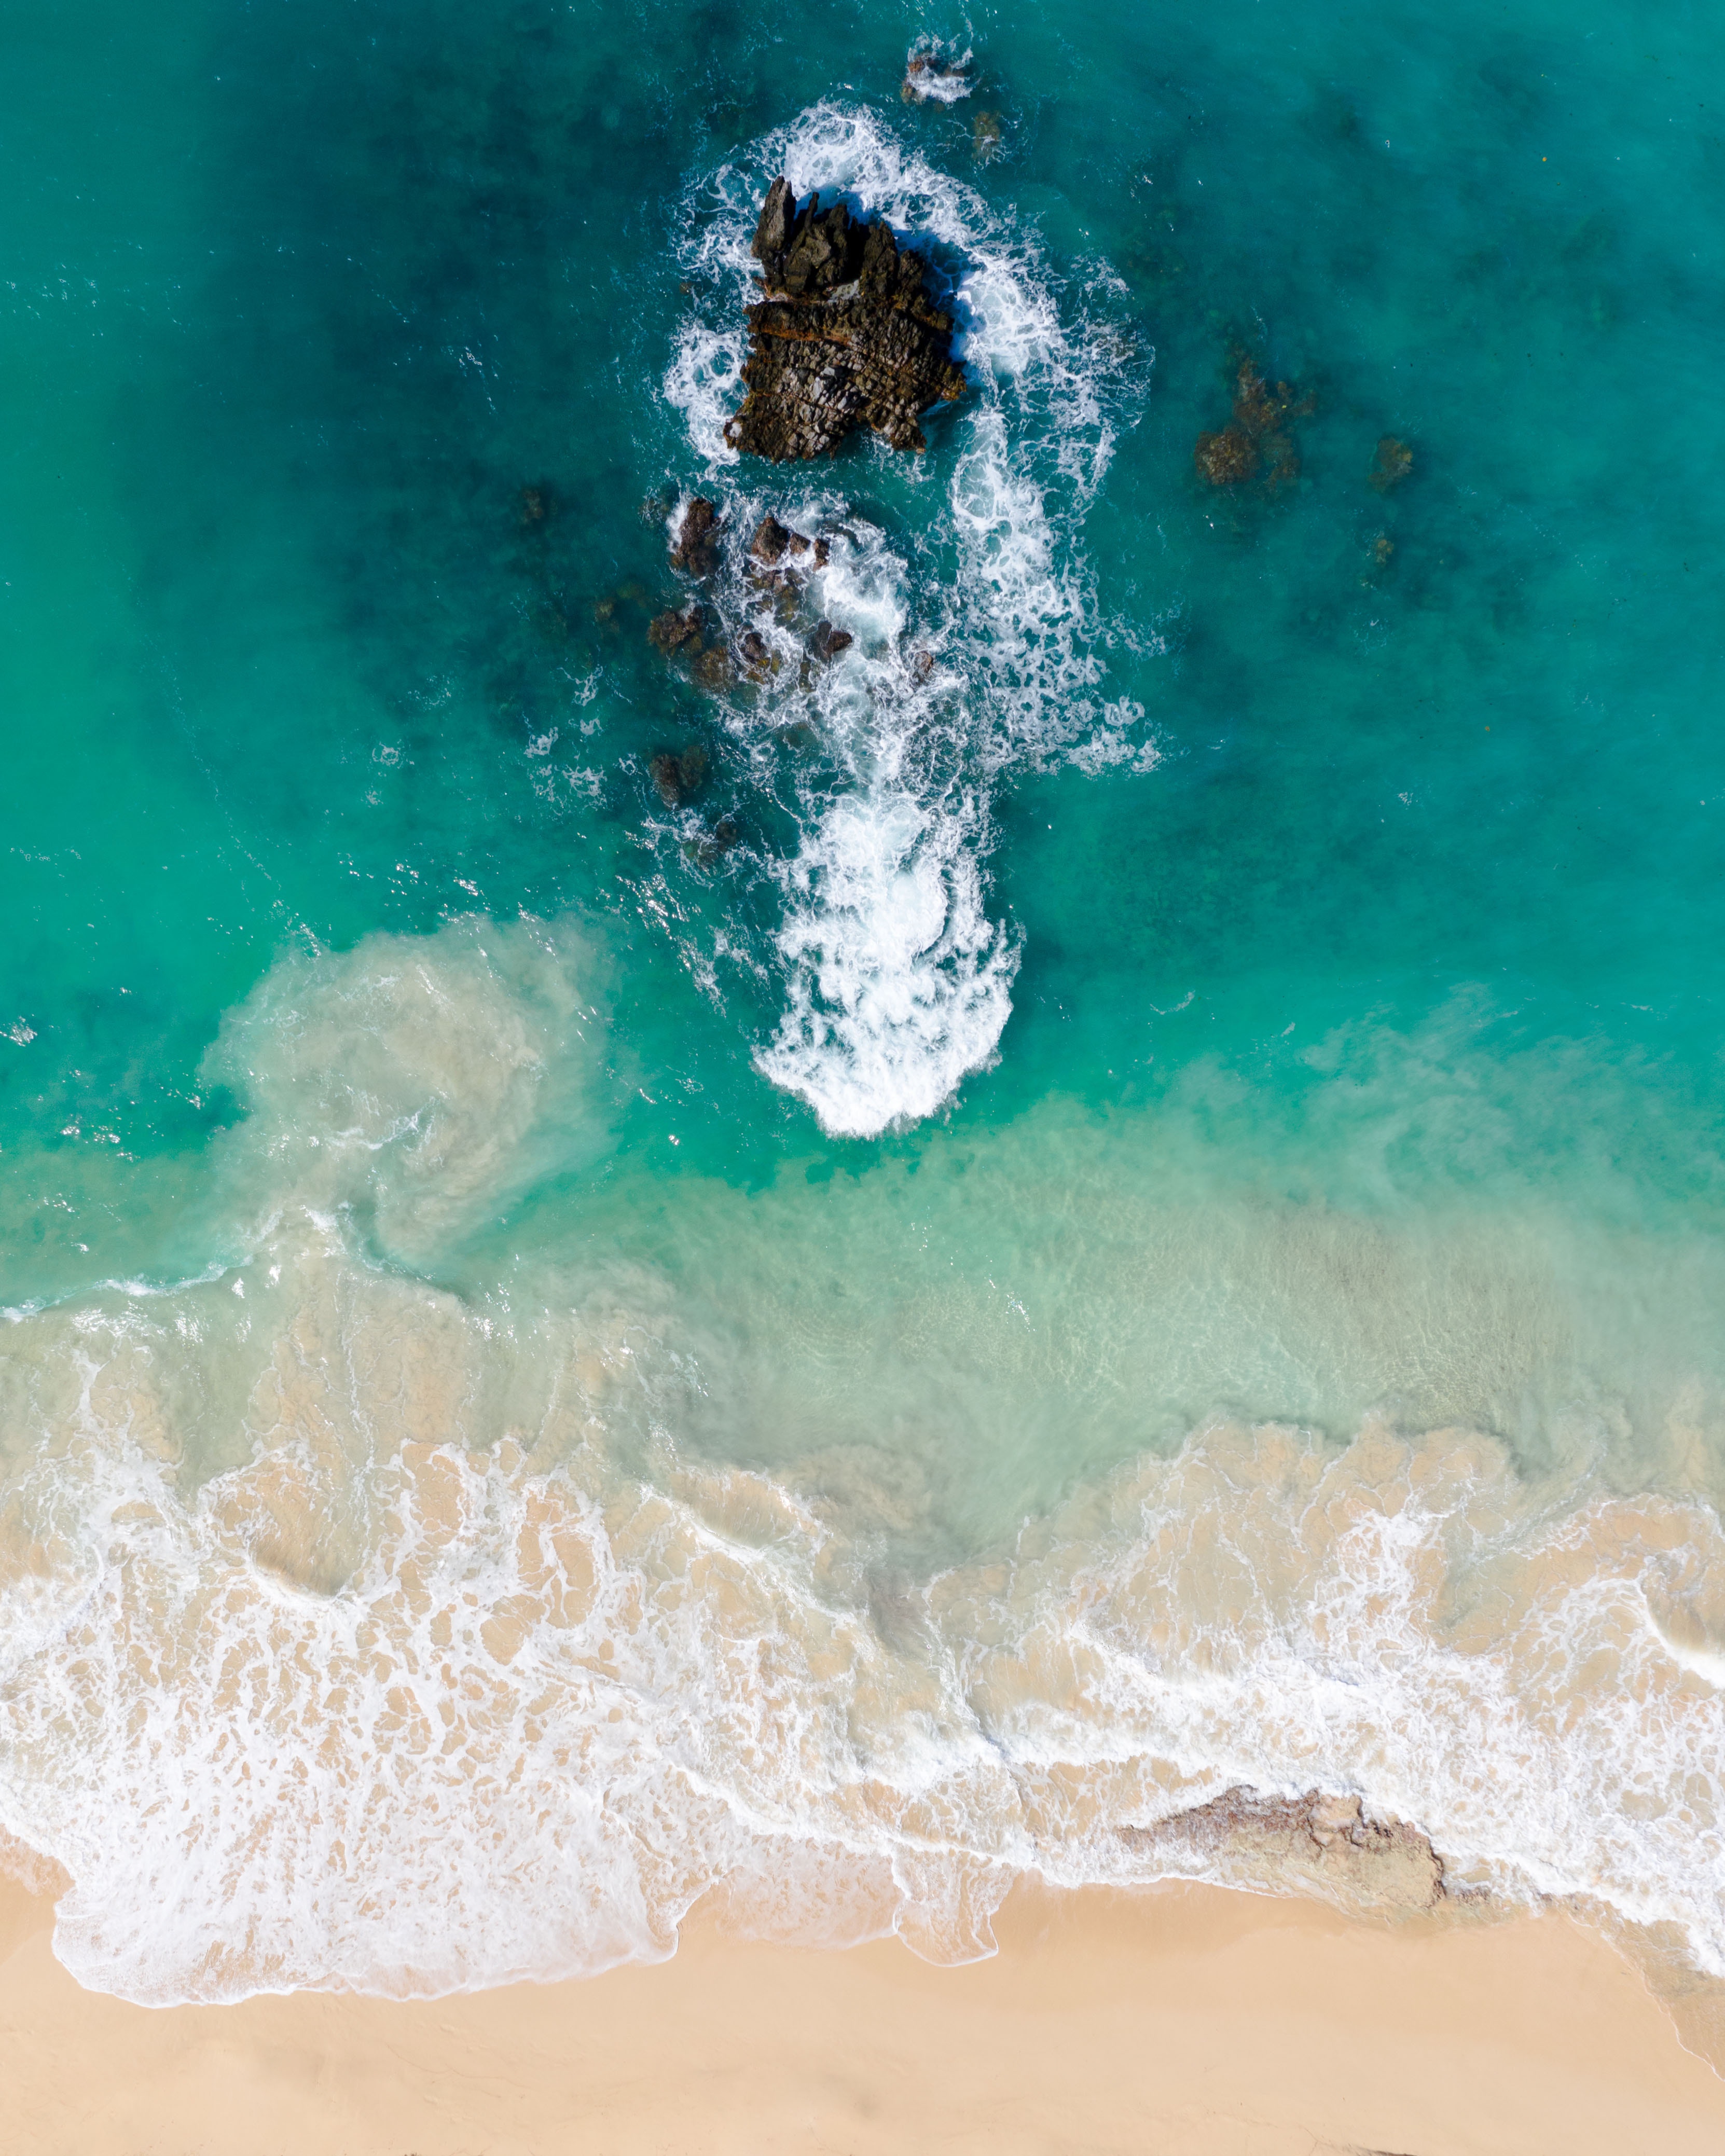 view from above, nature, beach, sand, ocean, foam, island, surf Image for desktop